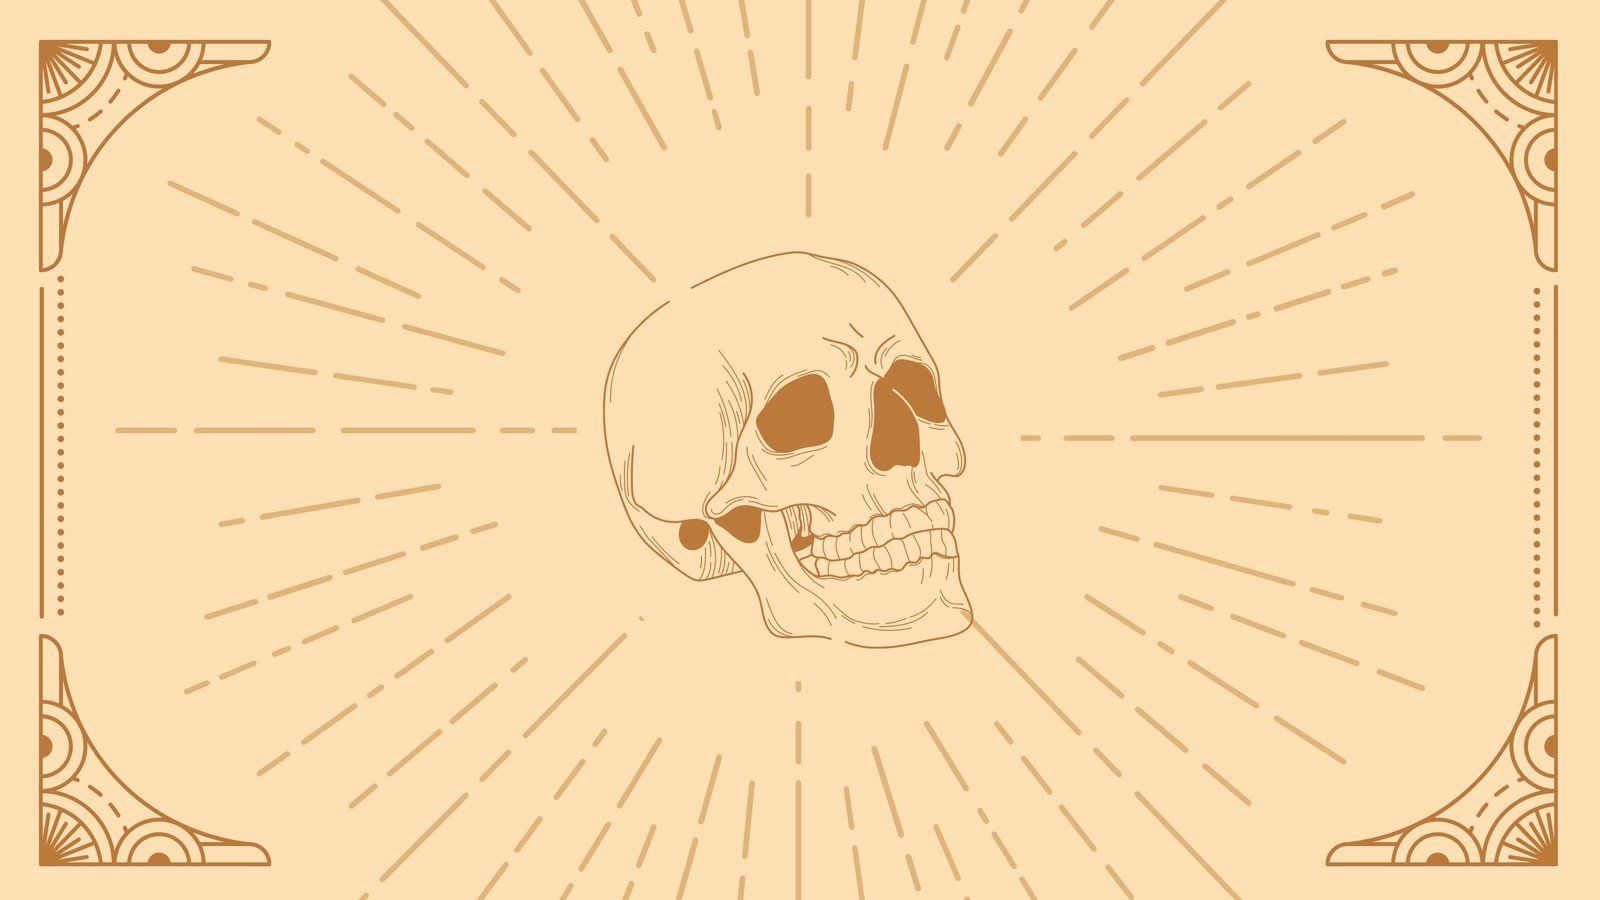 A human skull with rays of light emanating from it on a beige background - Halloween desktop